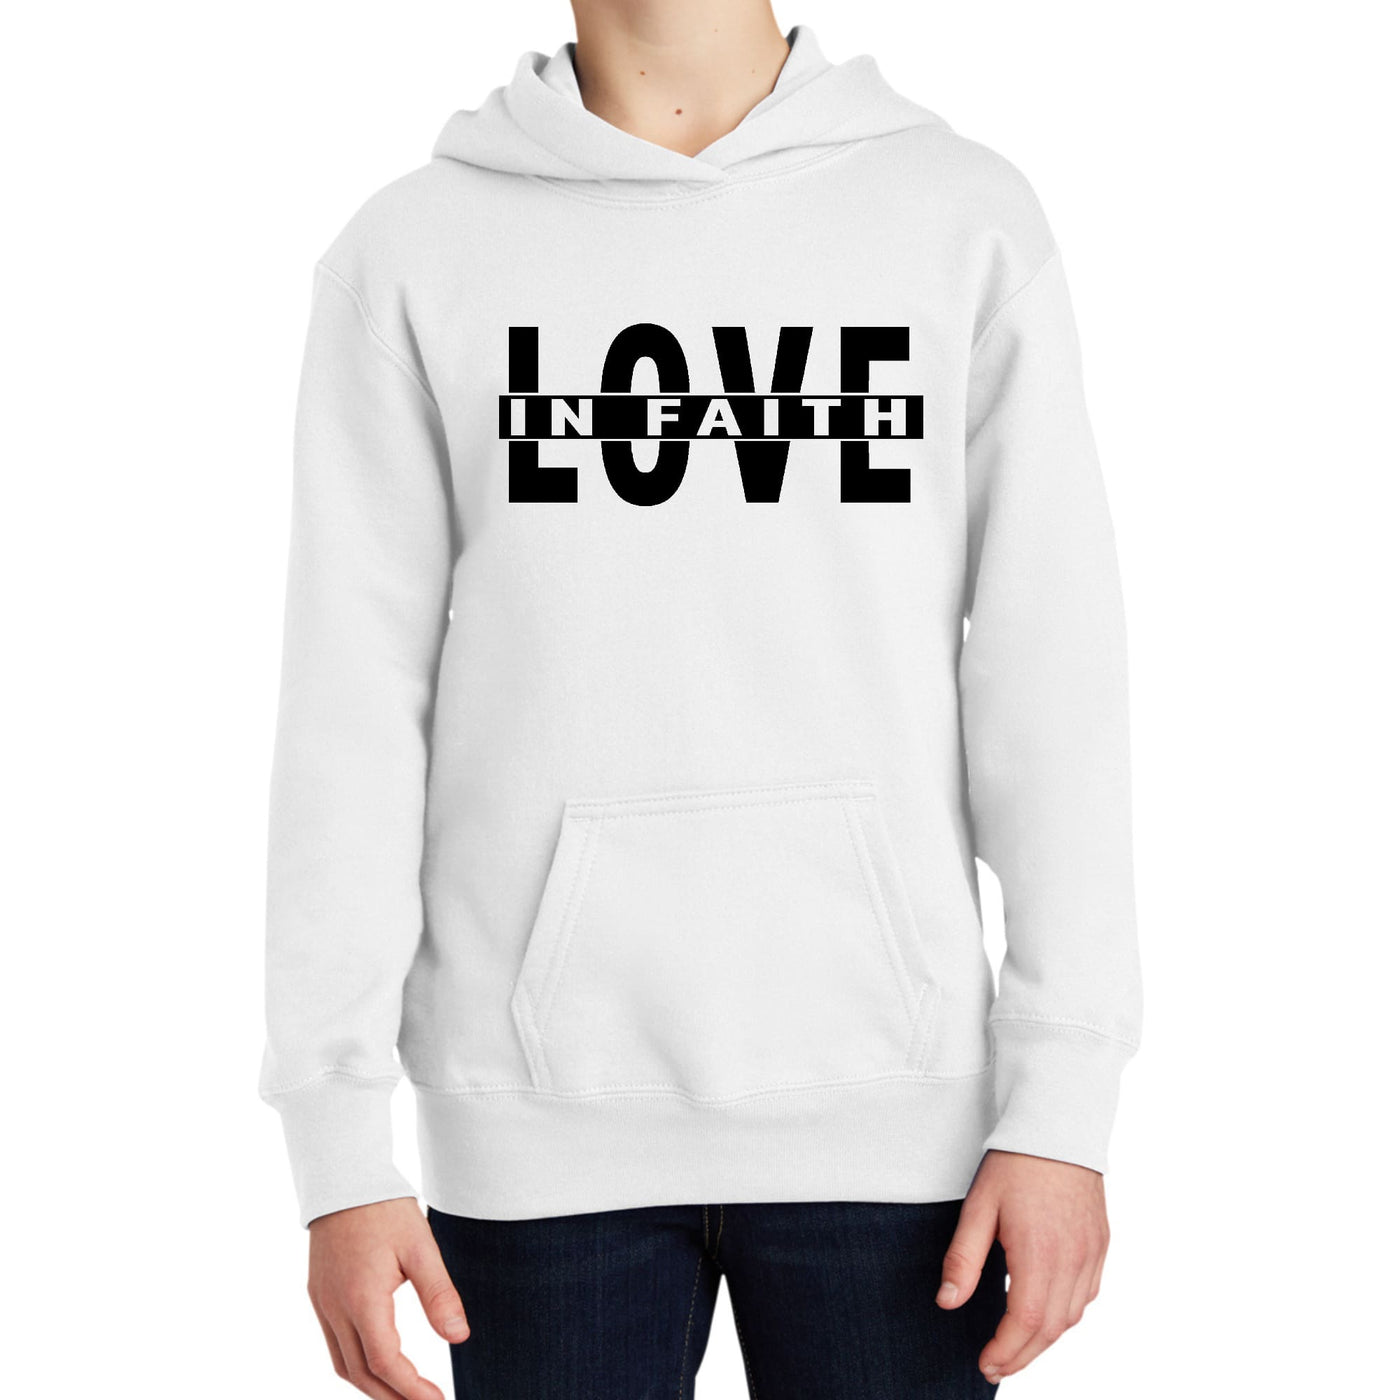 Youth Long Sleeve Hoodie Love In Faith Black Illustration - Youth | Hoodies